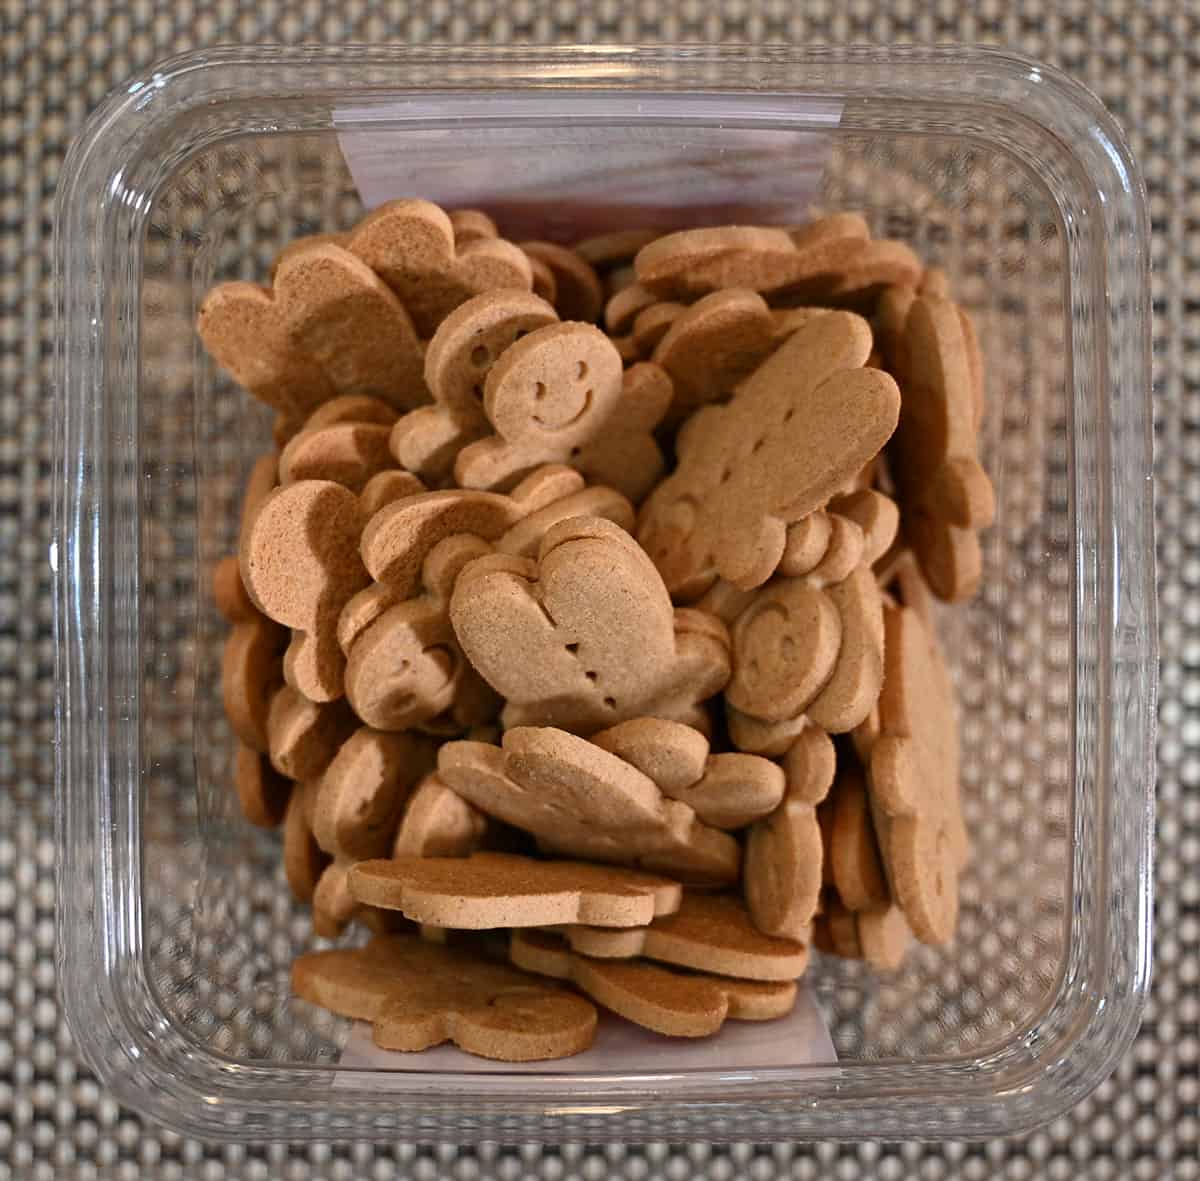 Top down image of the open container of gingerbread cookies.